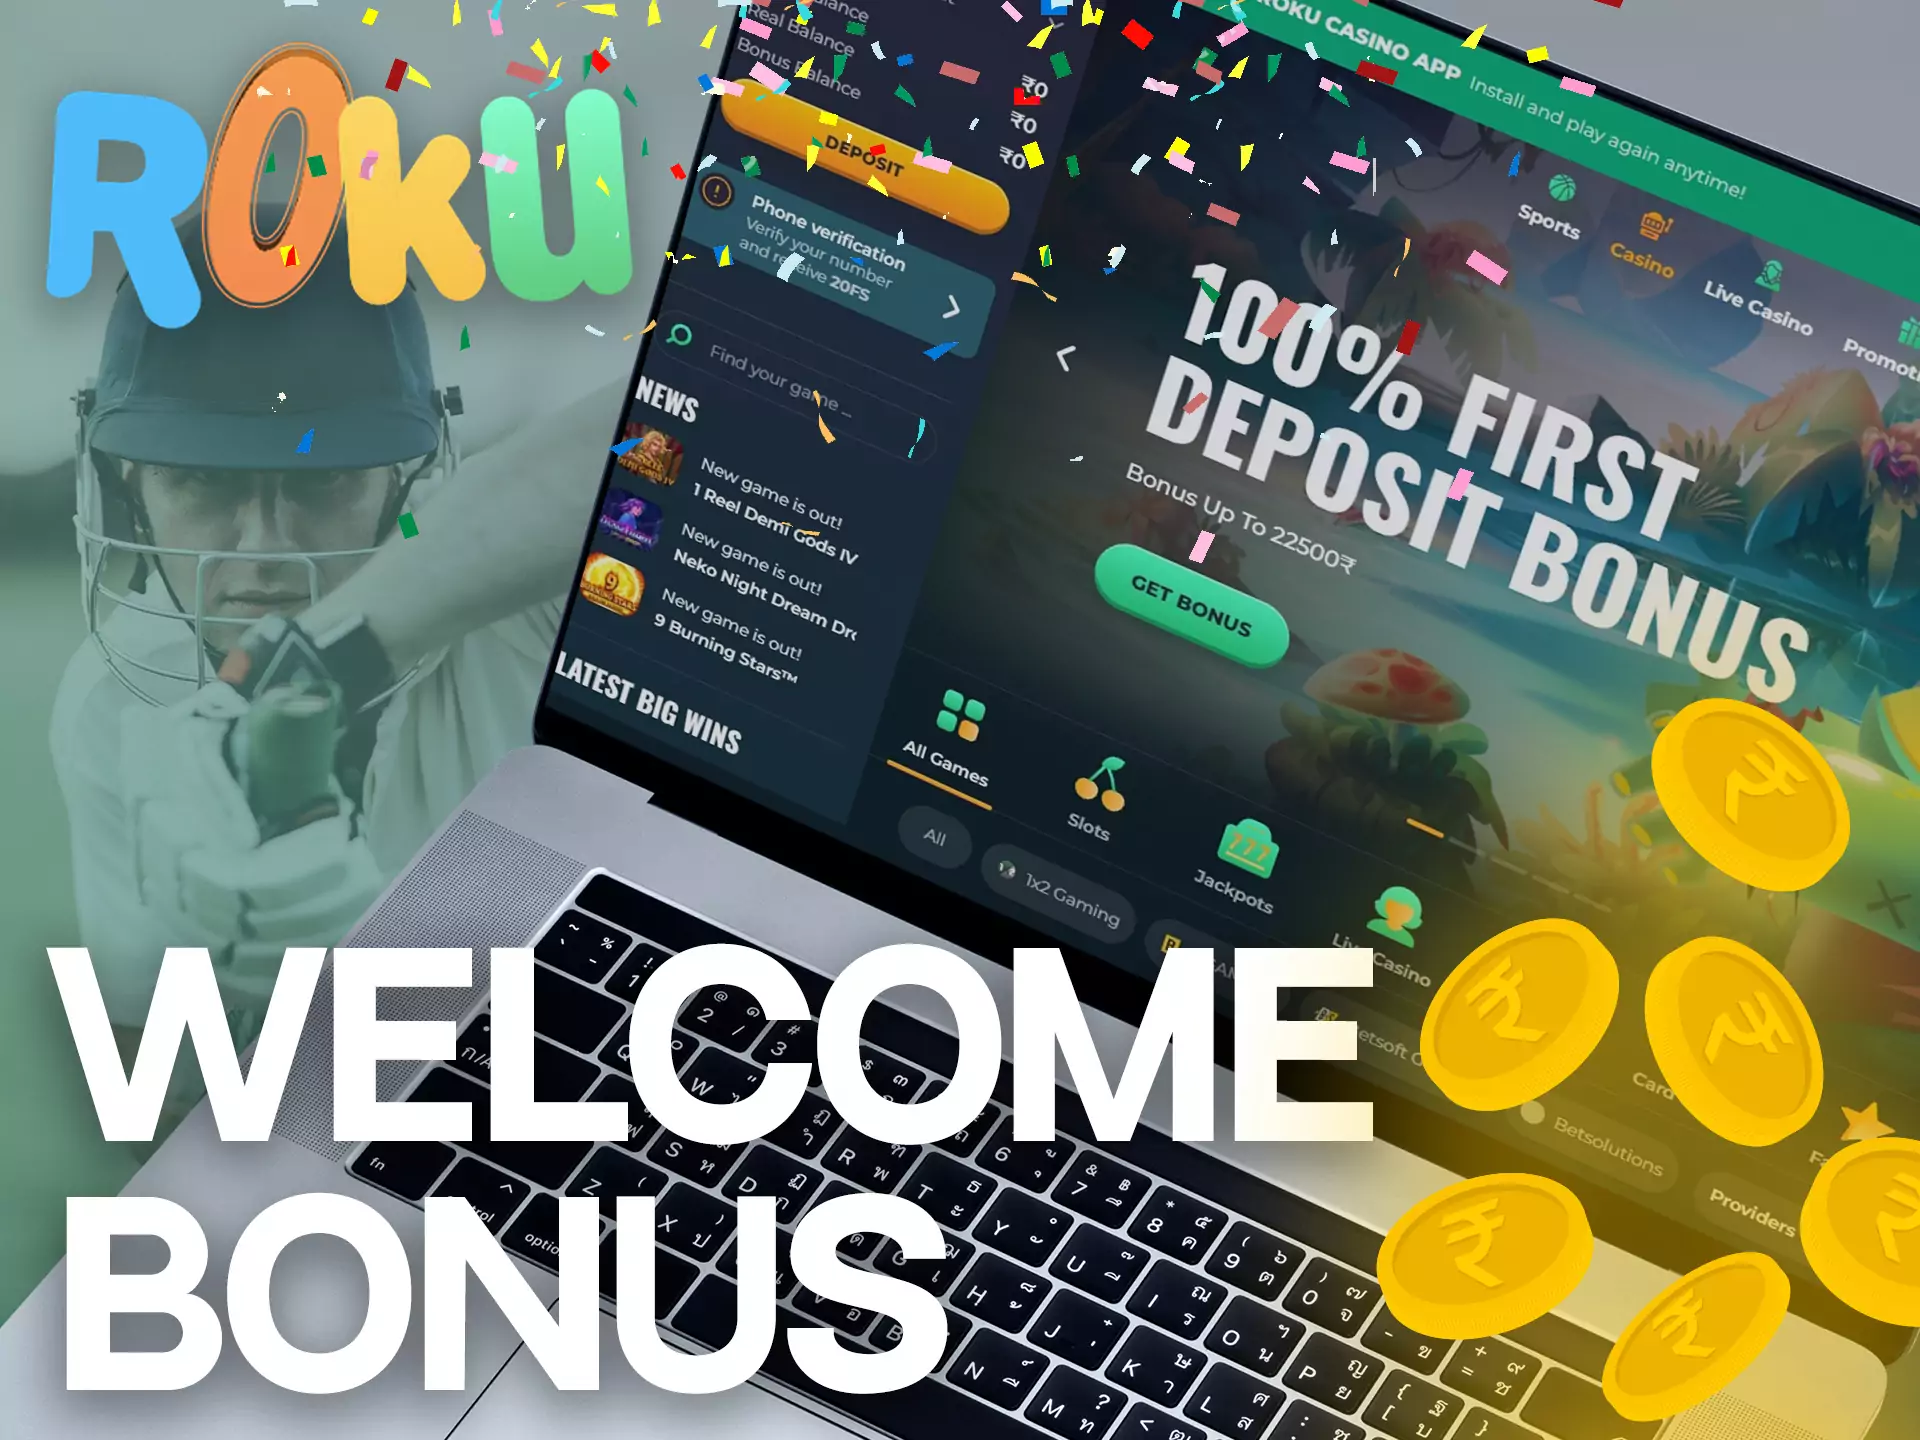 For sports betting, you can use your welcome bonus from Rokubet.